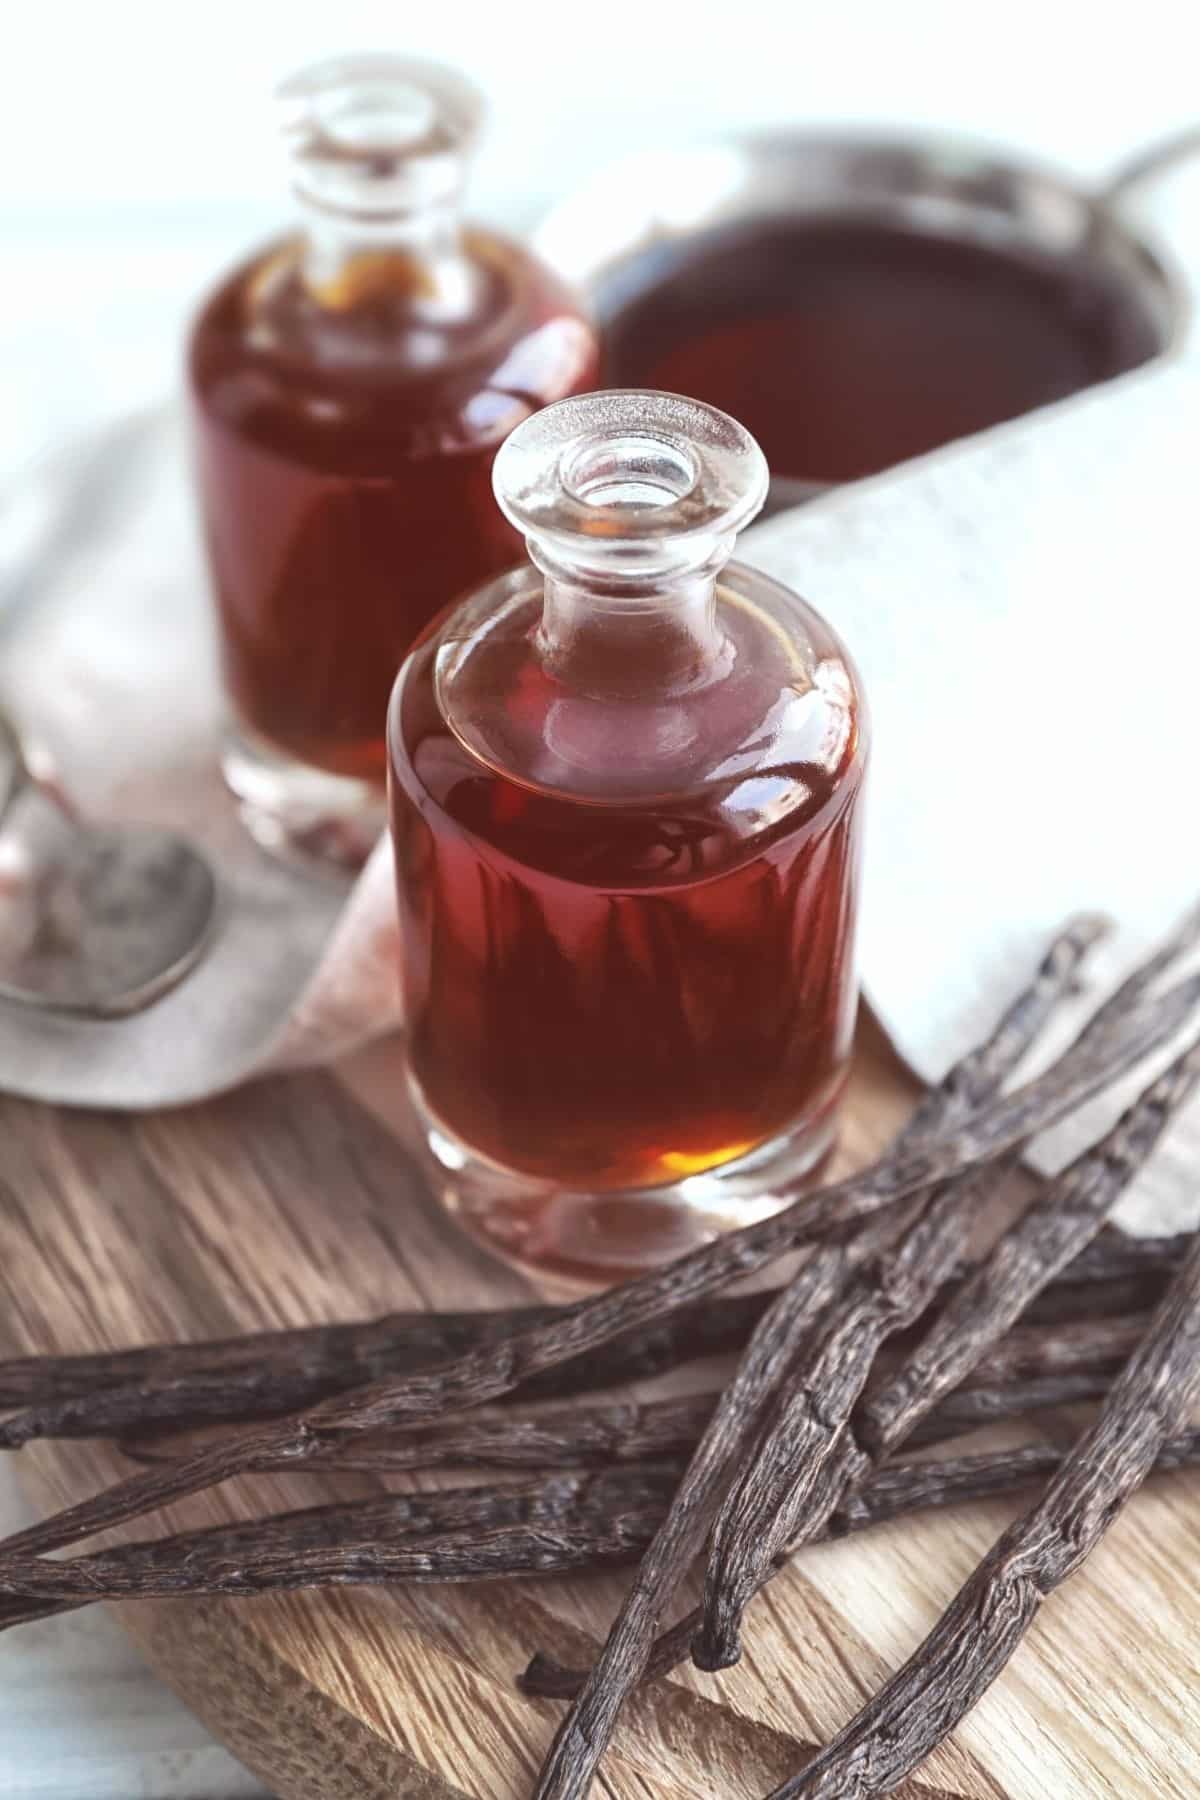 Two glass jars of vanilla extract on a cutting board.